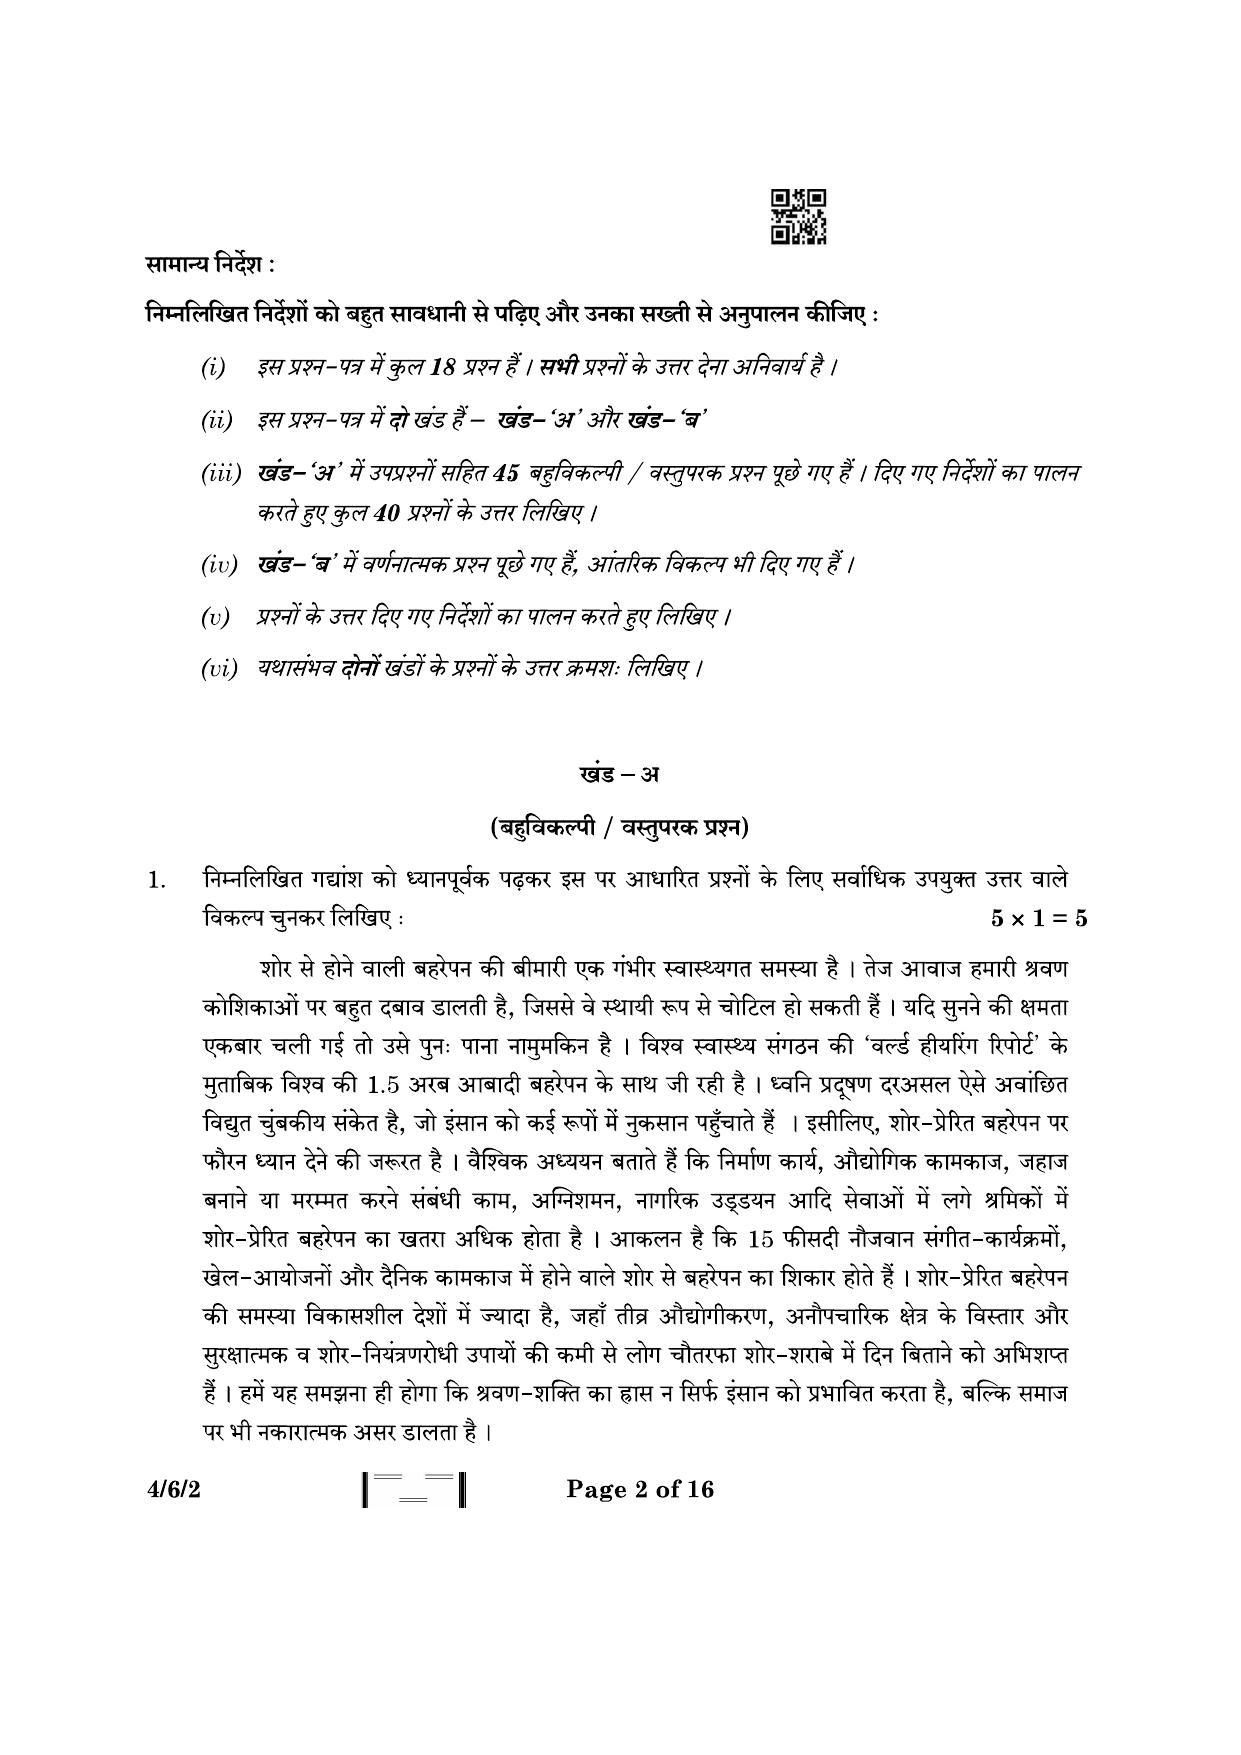 CBSE Class 10 4-6-2 Hindi B 2023 Question Paper - Page 2